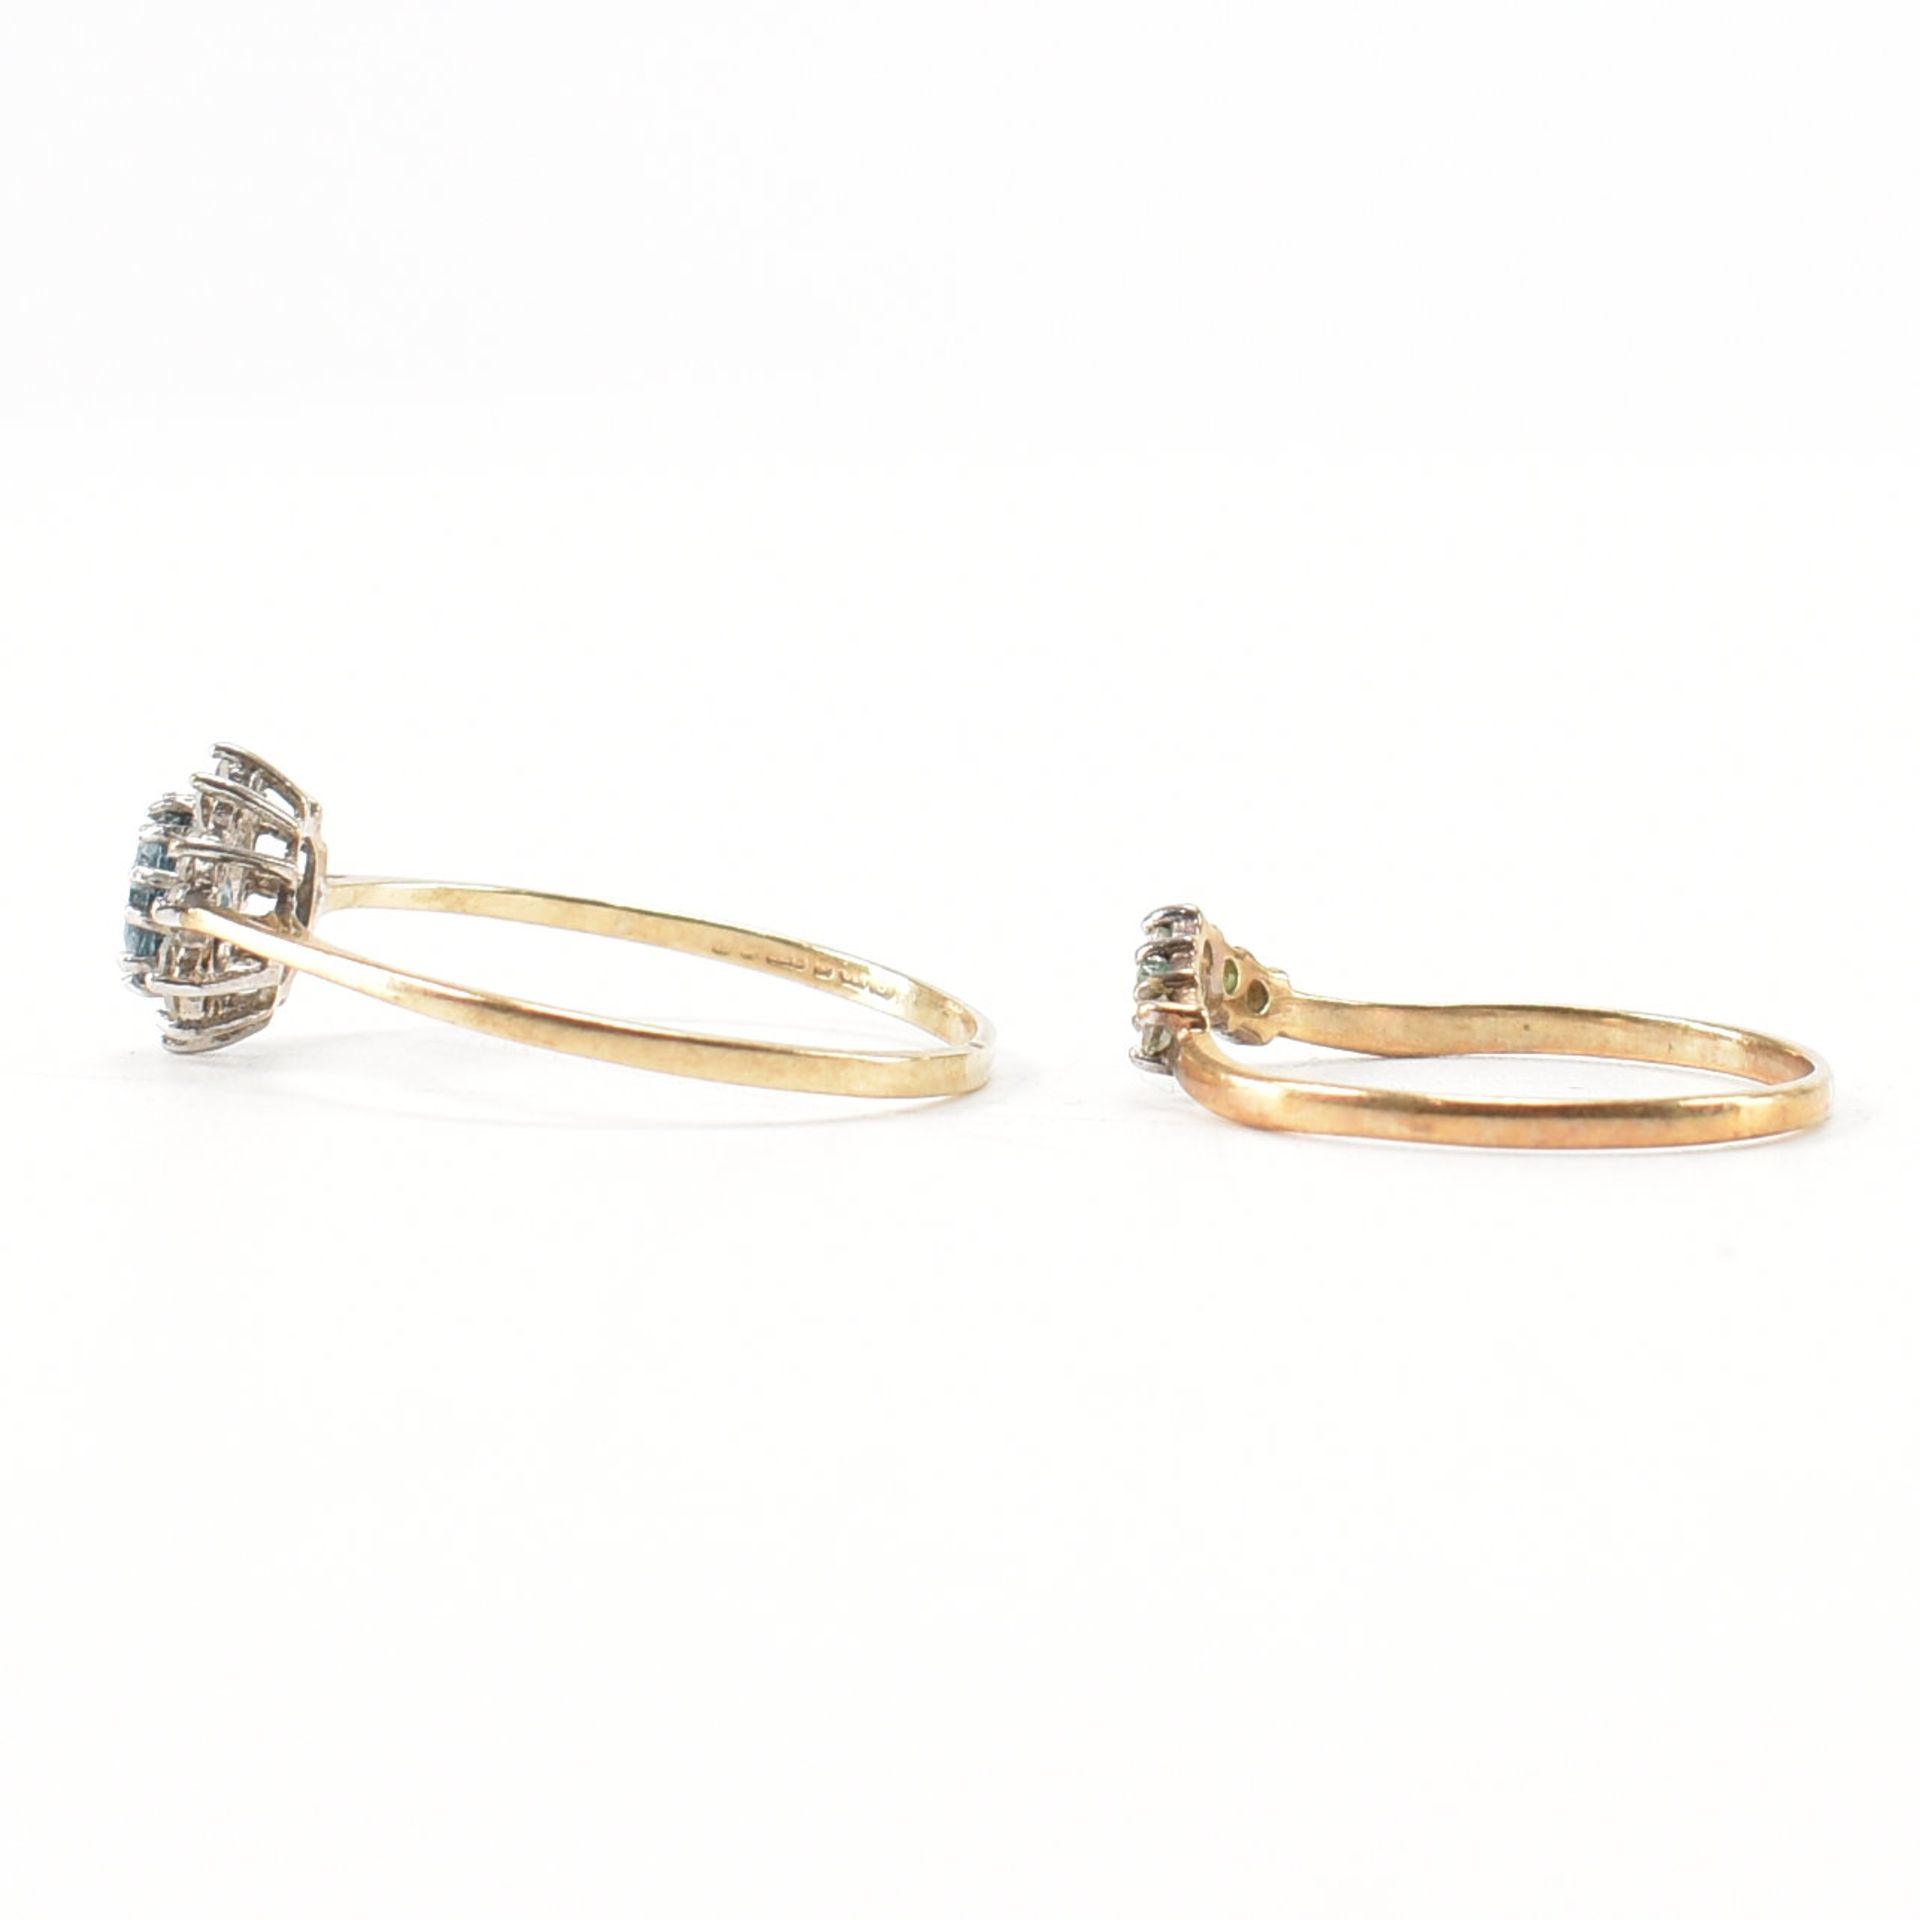 TWO 9CT GOLD GEM SET RINGS - Image 2 of 7